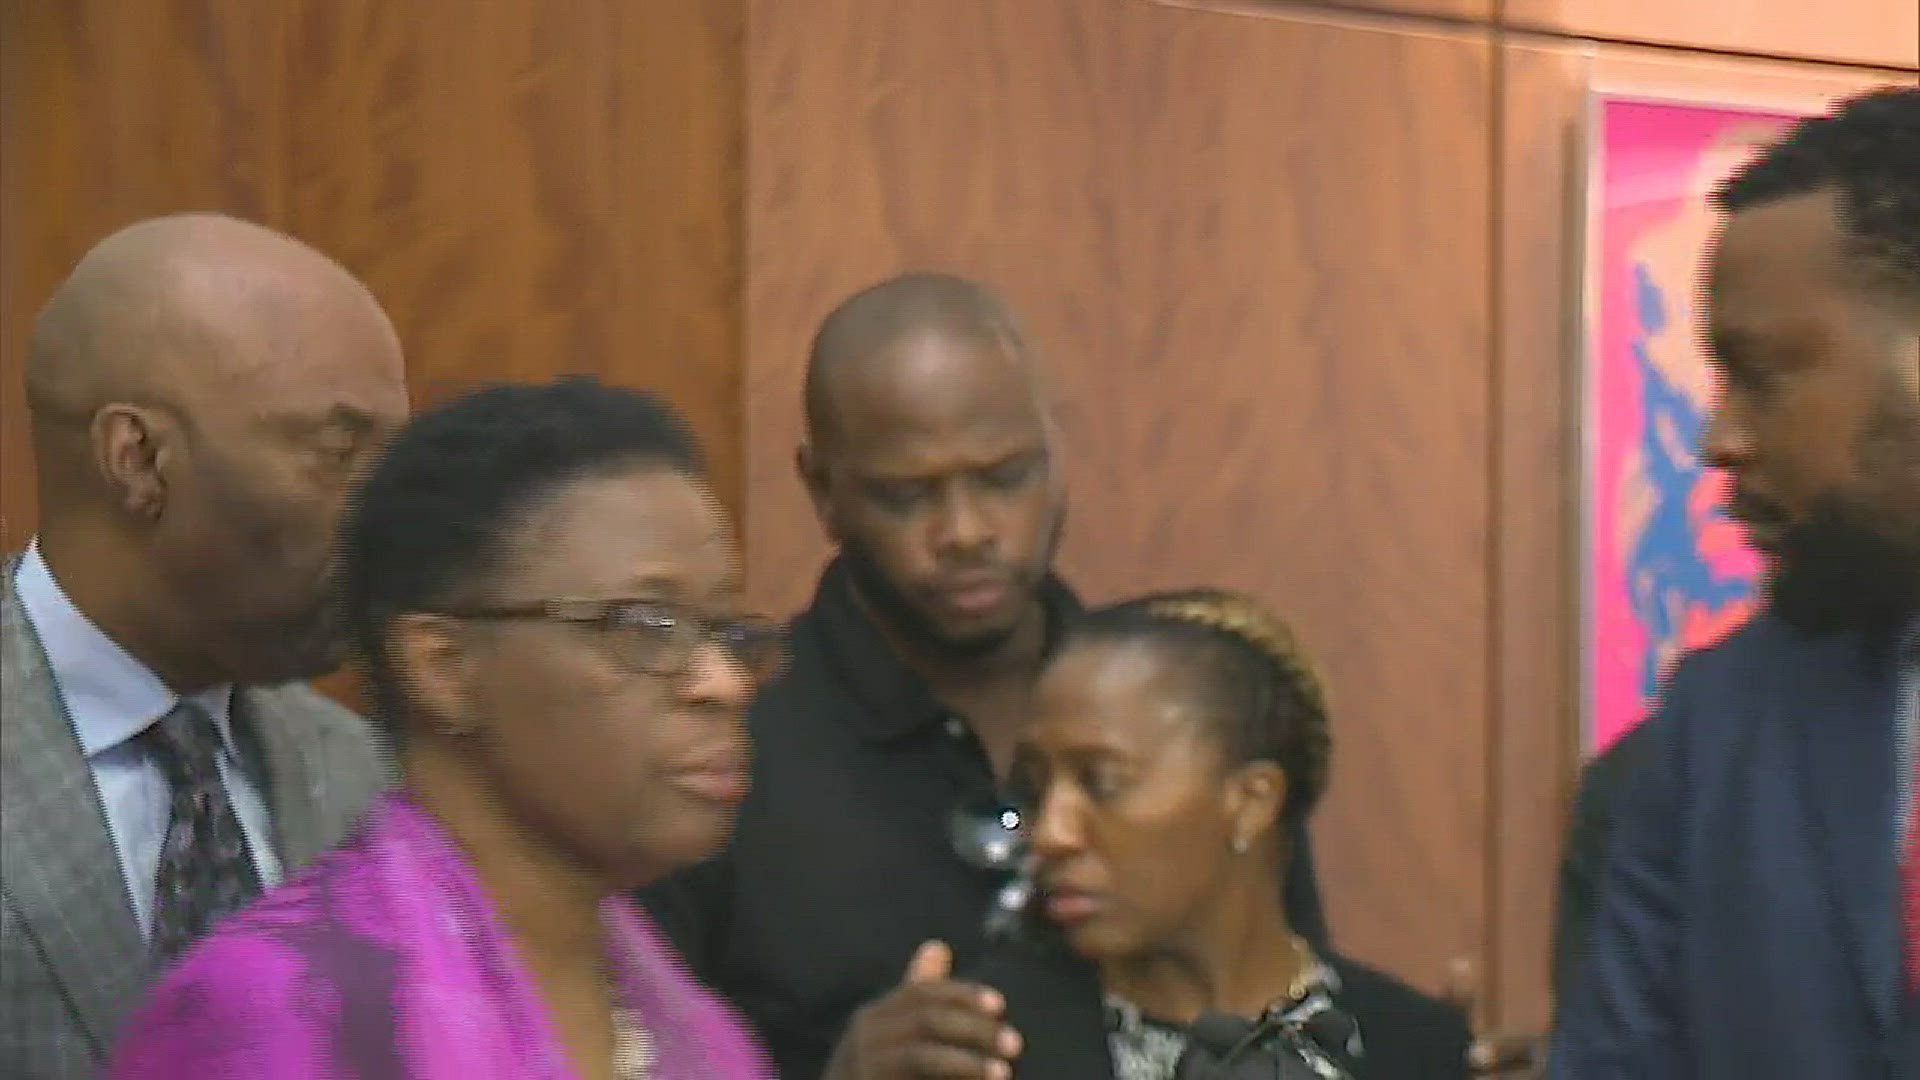 Mother of Botham Jean, Allison Jean demands justice for her son who was shot and killed by Dallas Police Officer Amber Guyger.